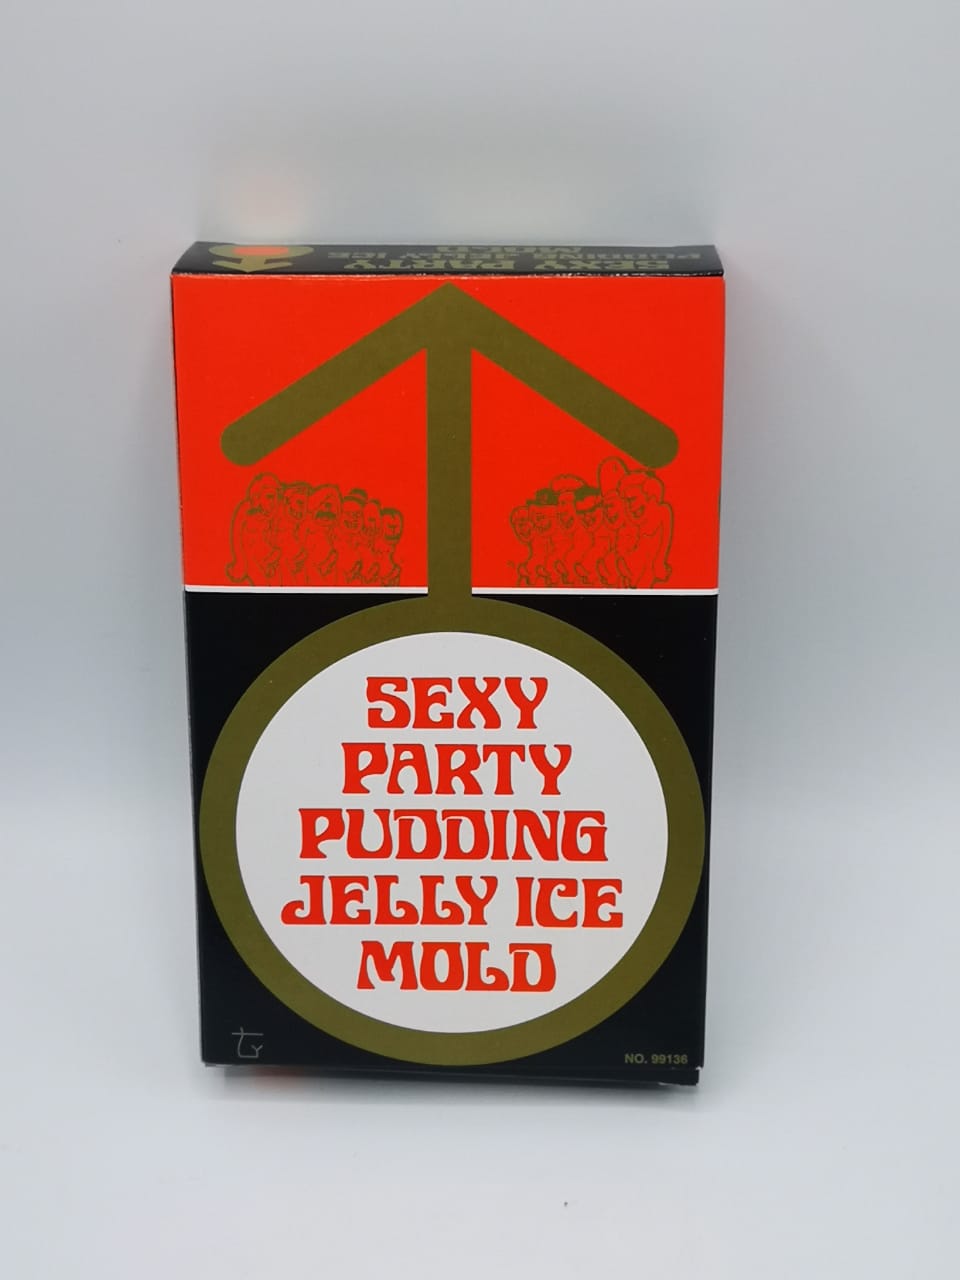 Mold for jelly or ice 